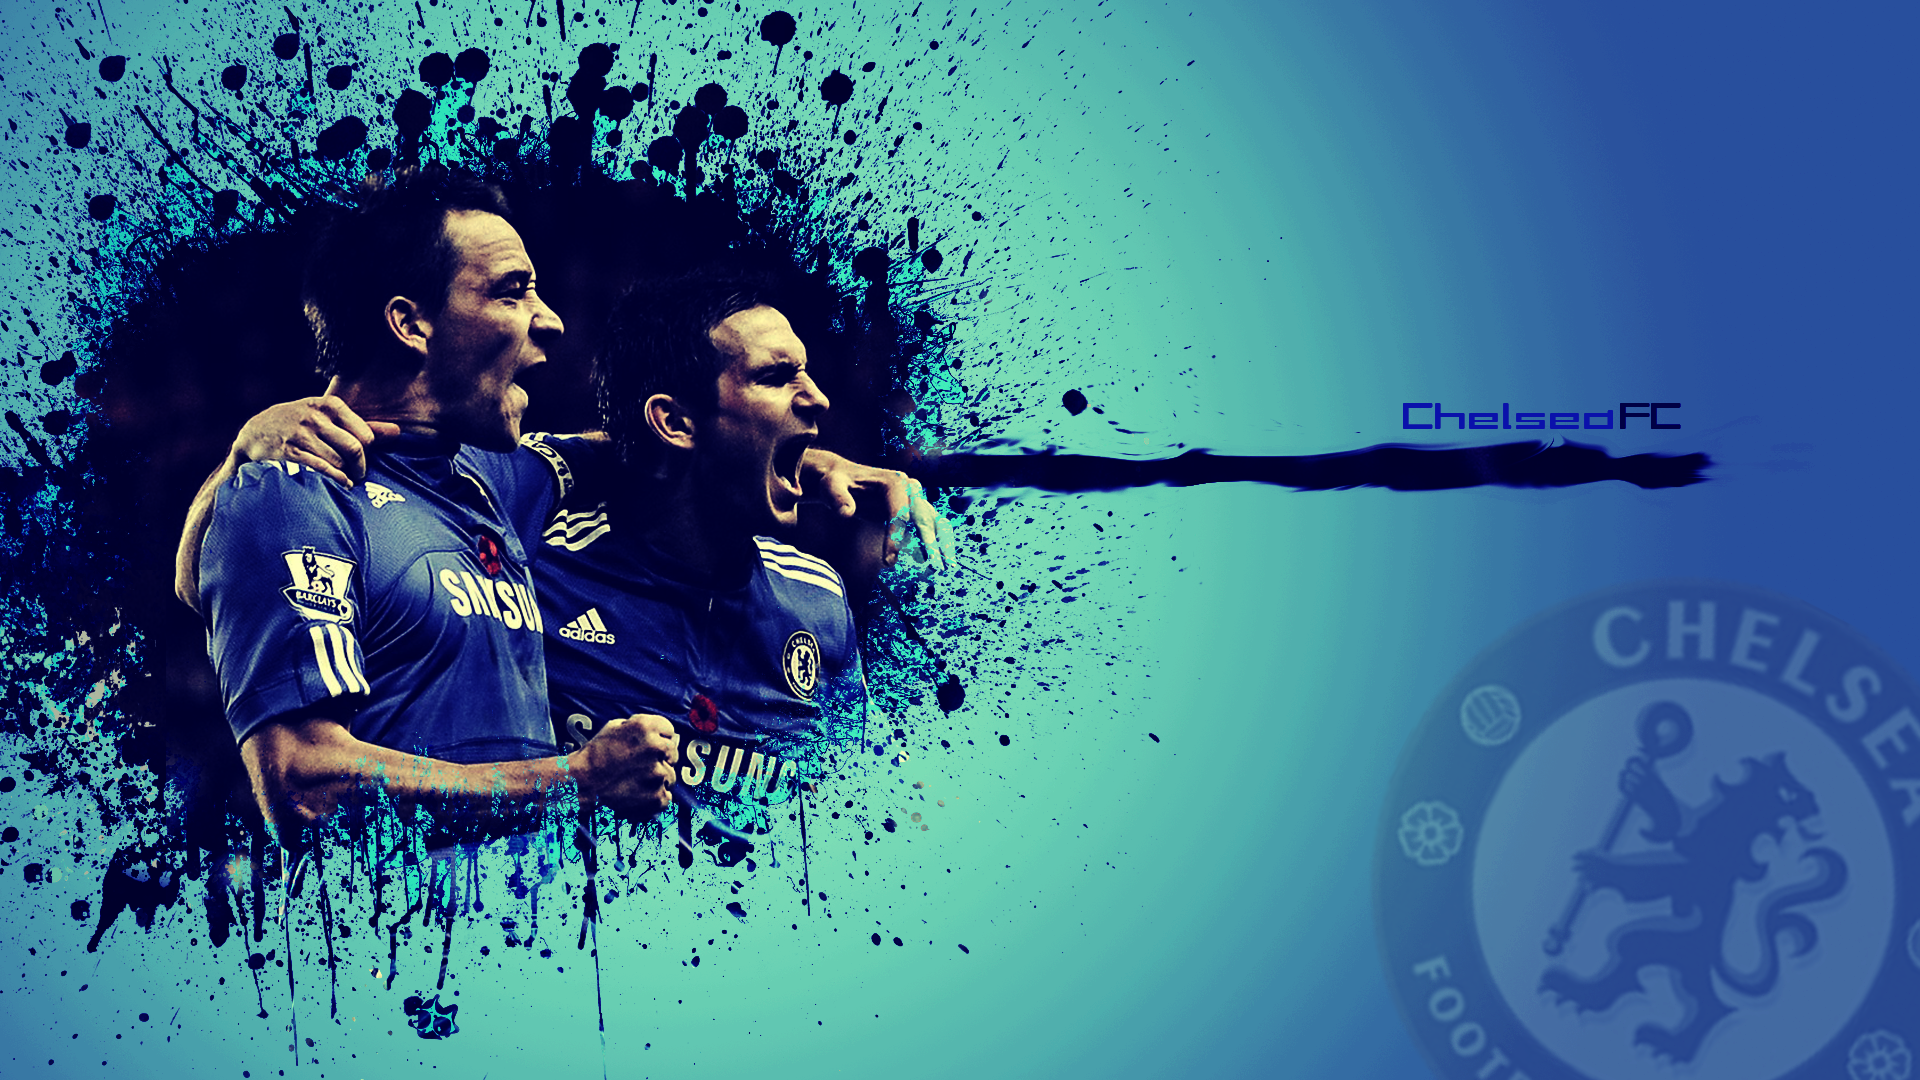 Chelsea FC - UCL Wallpaper by MATOGraphics on DeviantArt